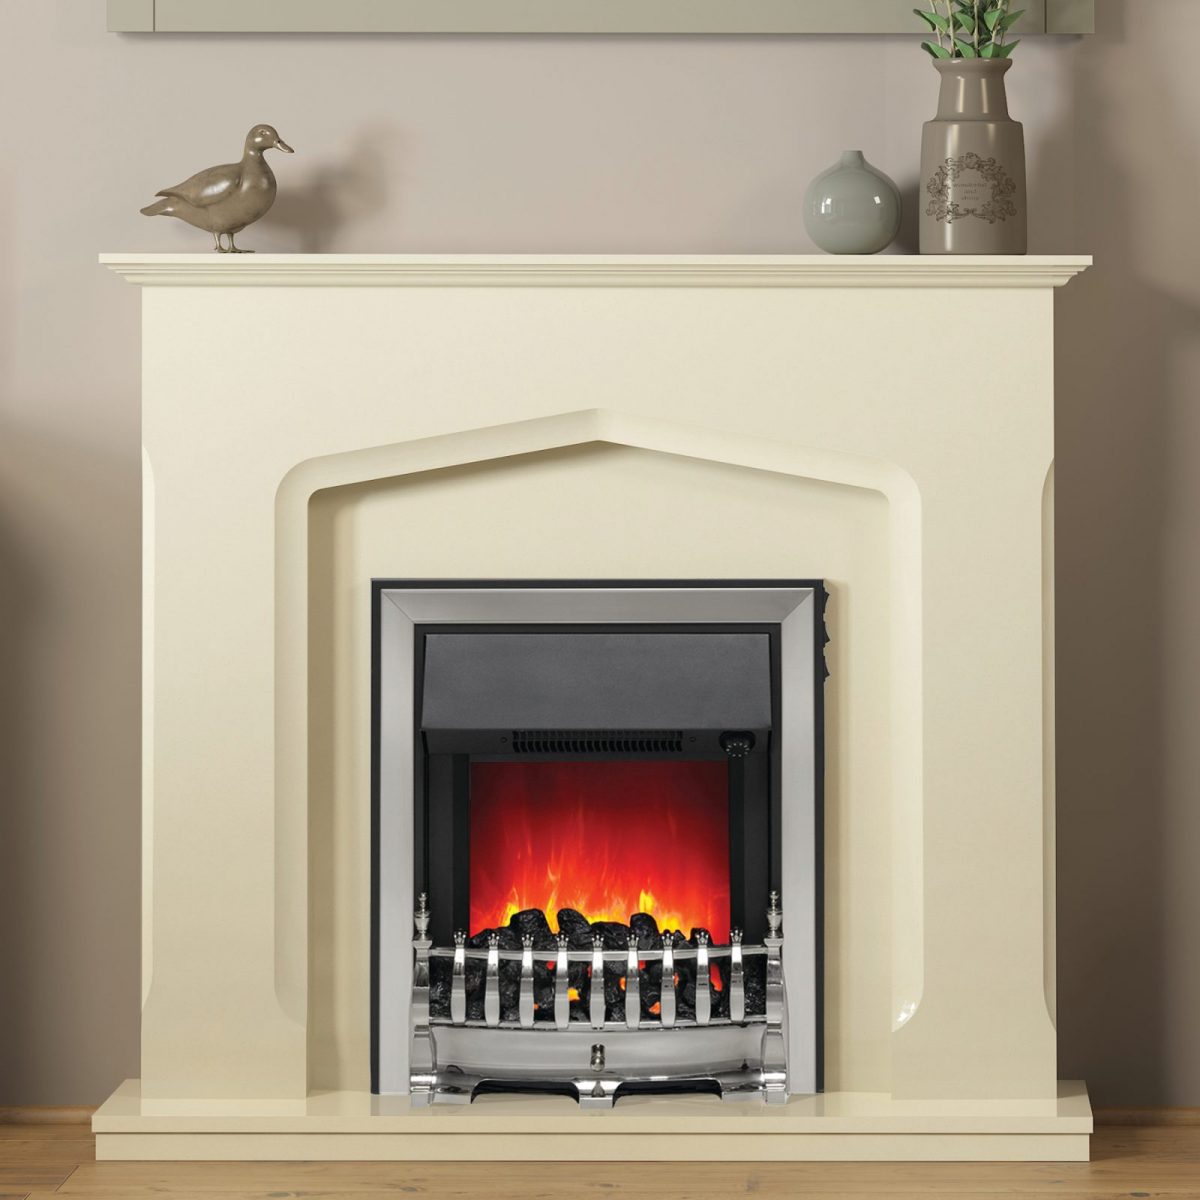 45″ Bramwell fireplace in Marfil marble effect with Electric Brass Finish Fire